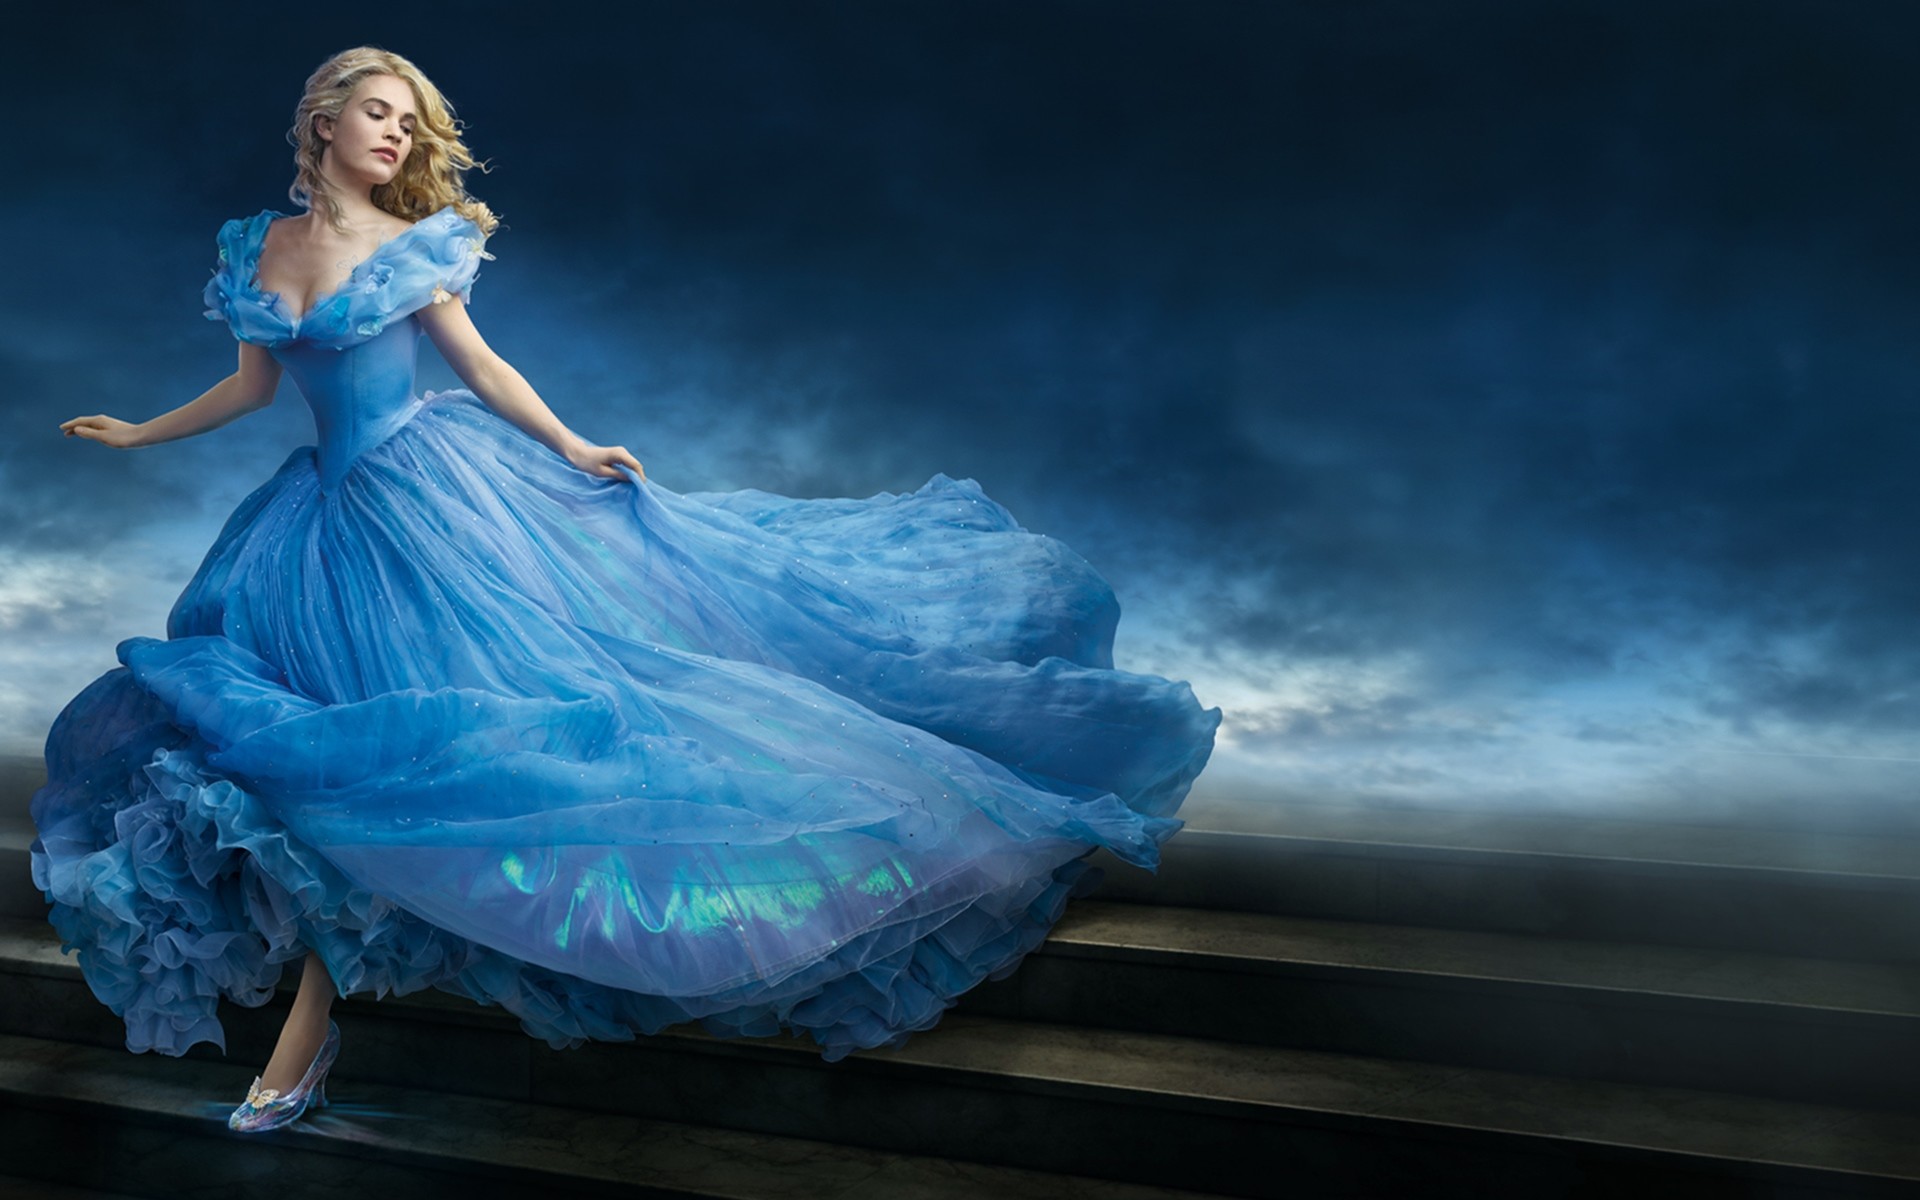 Disney Cinderella HD big wallpapers with beautiful pictures  YouLoveItcom